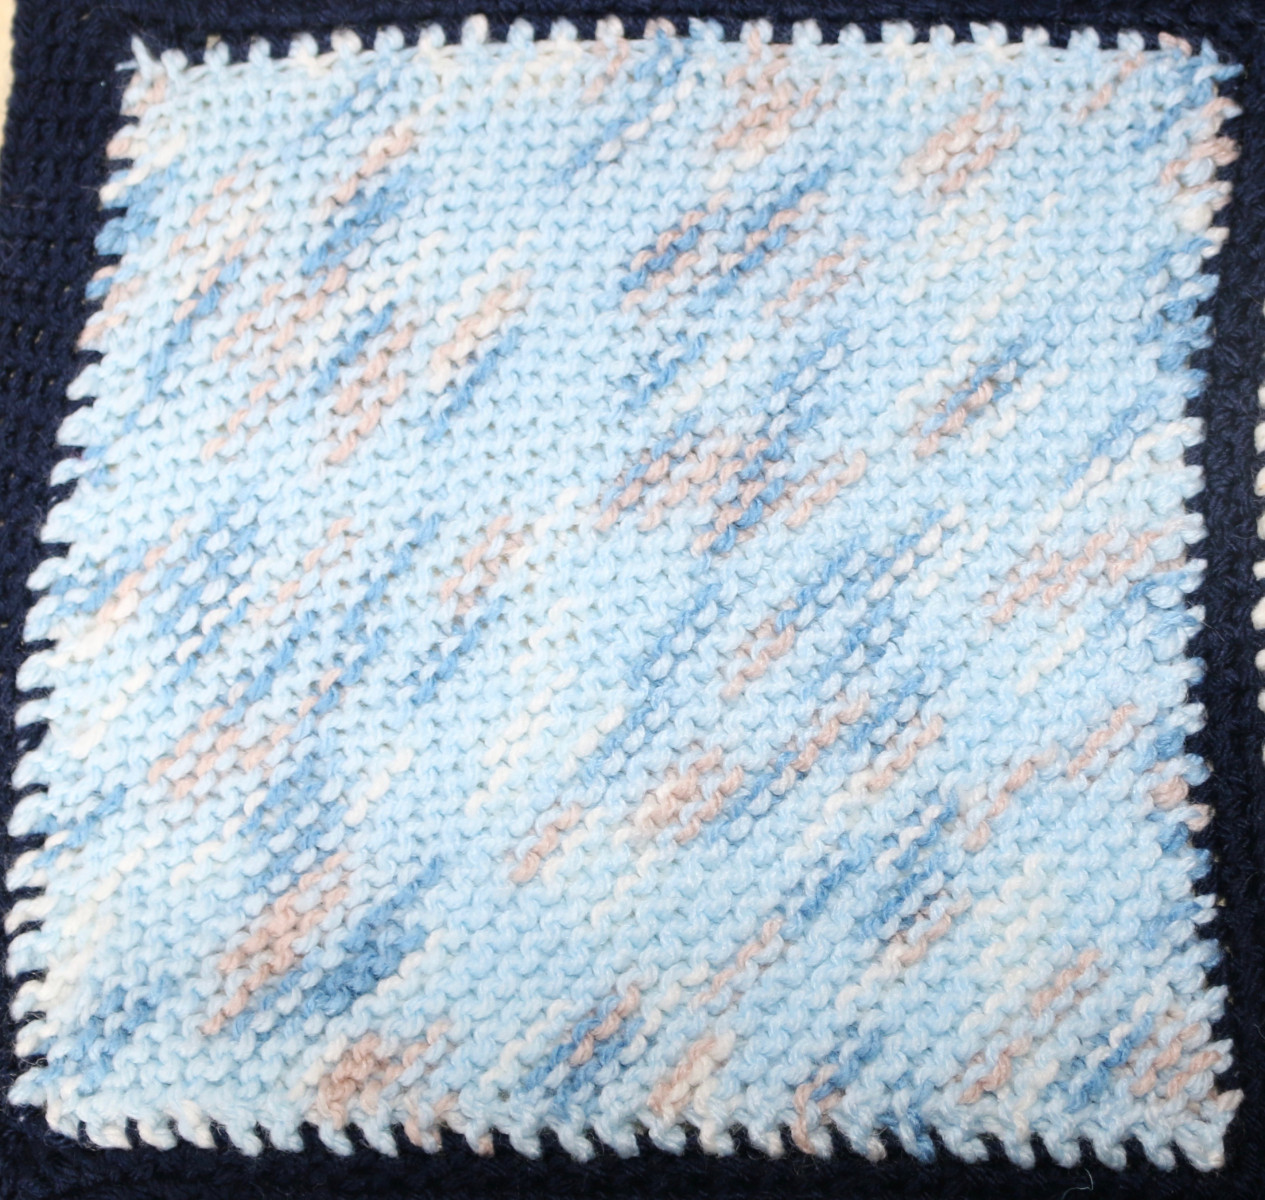 Knitted square in blue, pink and white